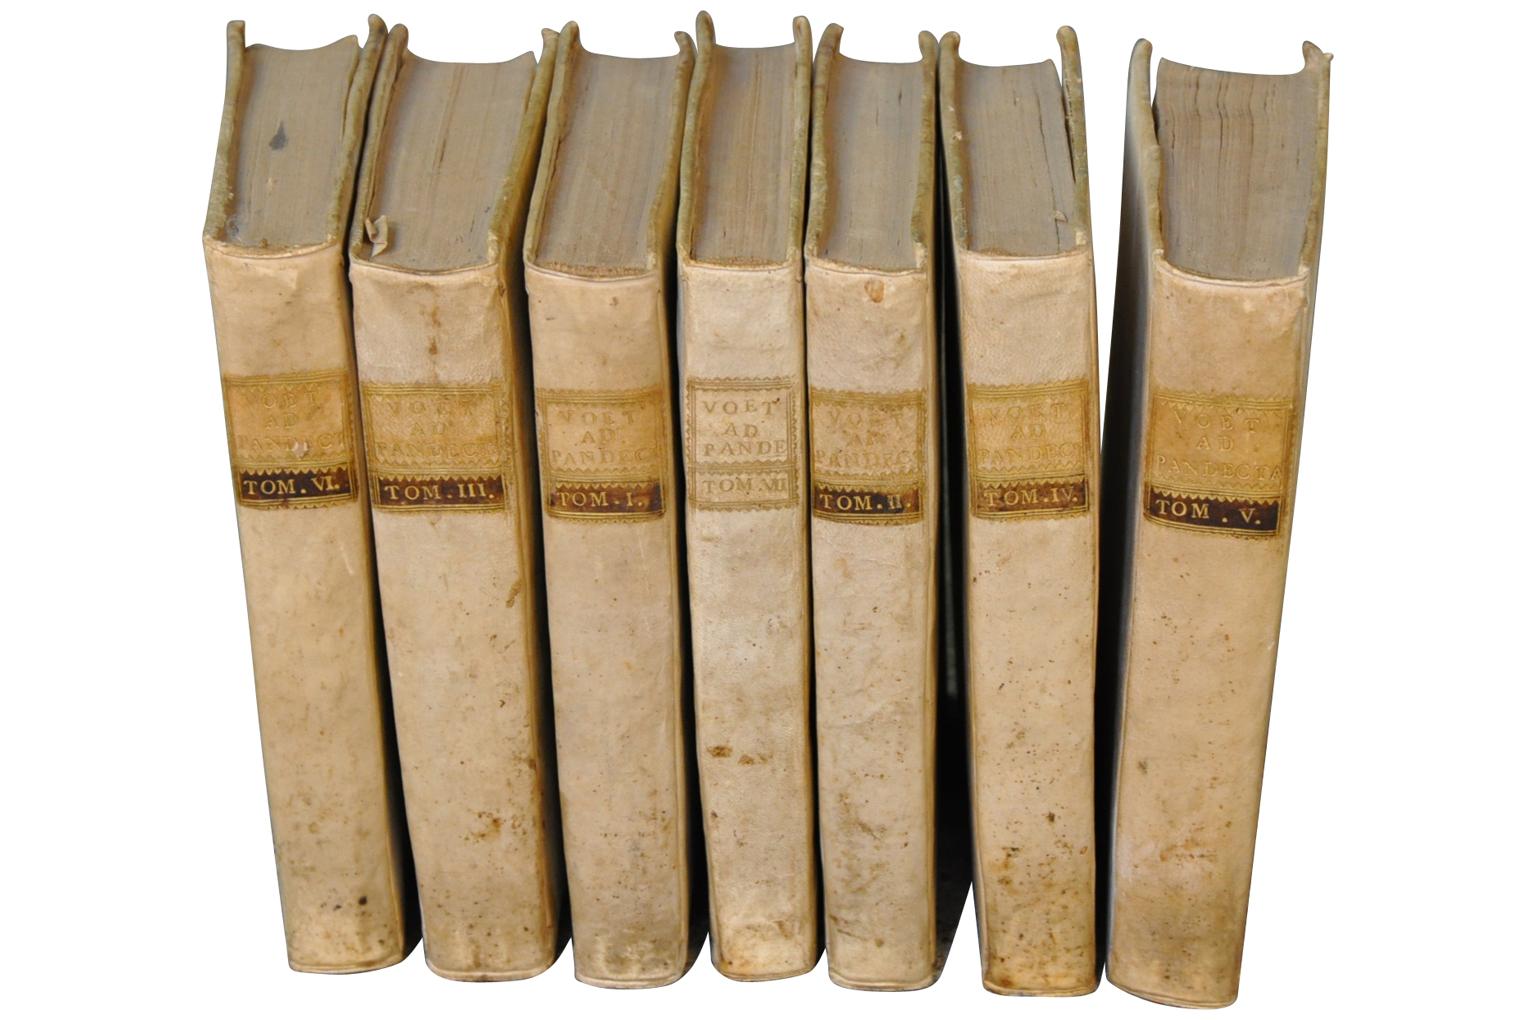 A beautiful collection of seven Italian 18th century vellum books. Lined up side by side, the books measure 9 3/4